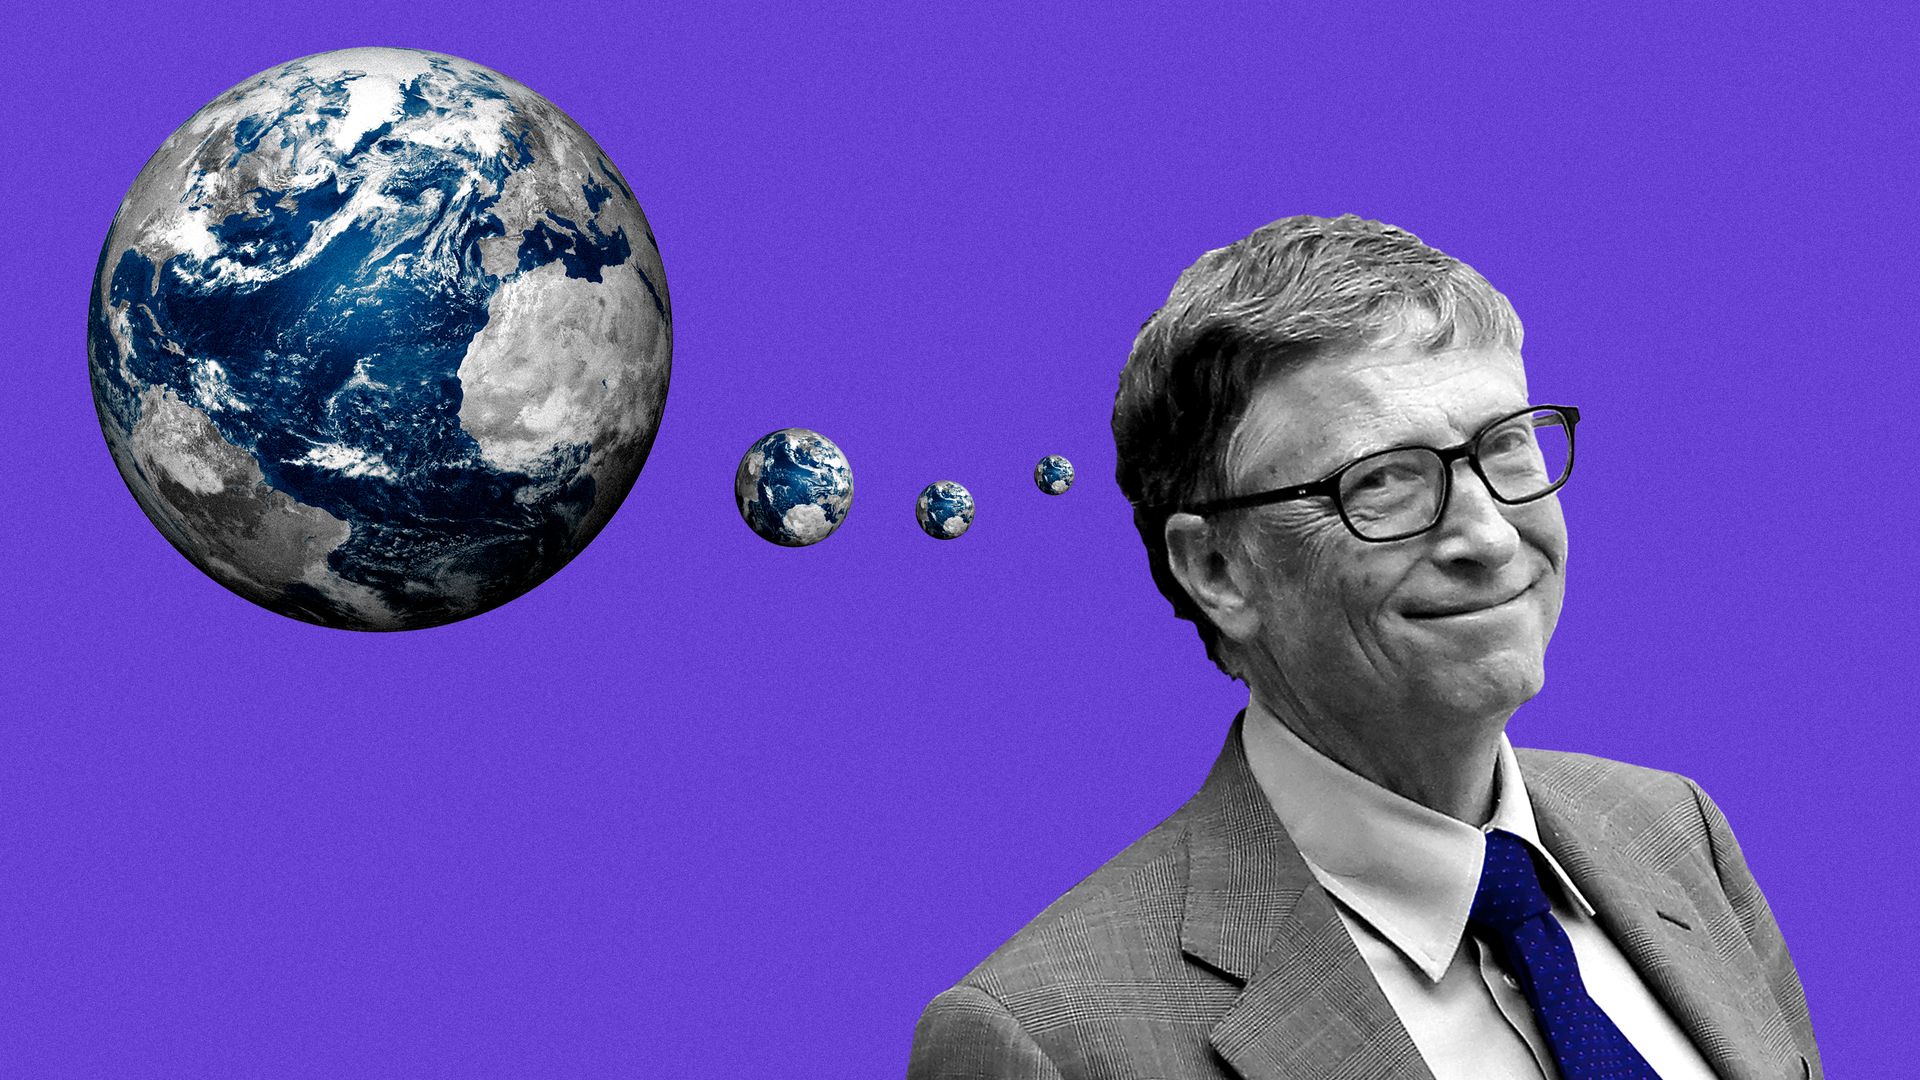 Bill Gates with a thought bubble showing the Earth